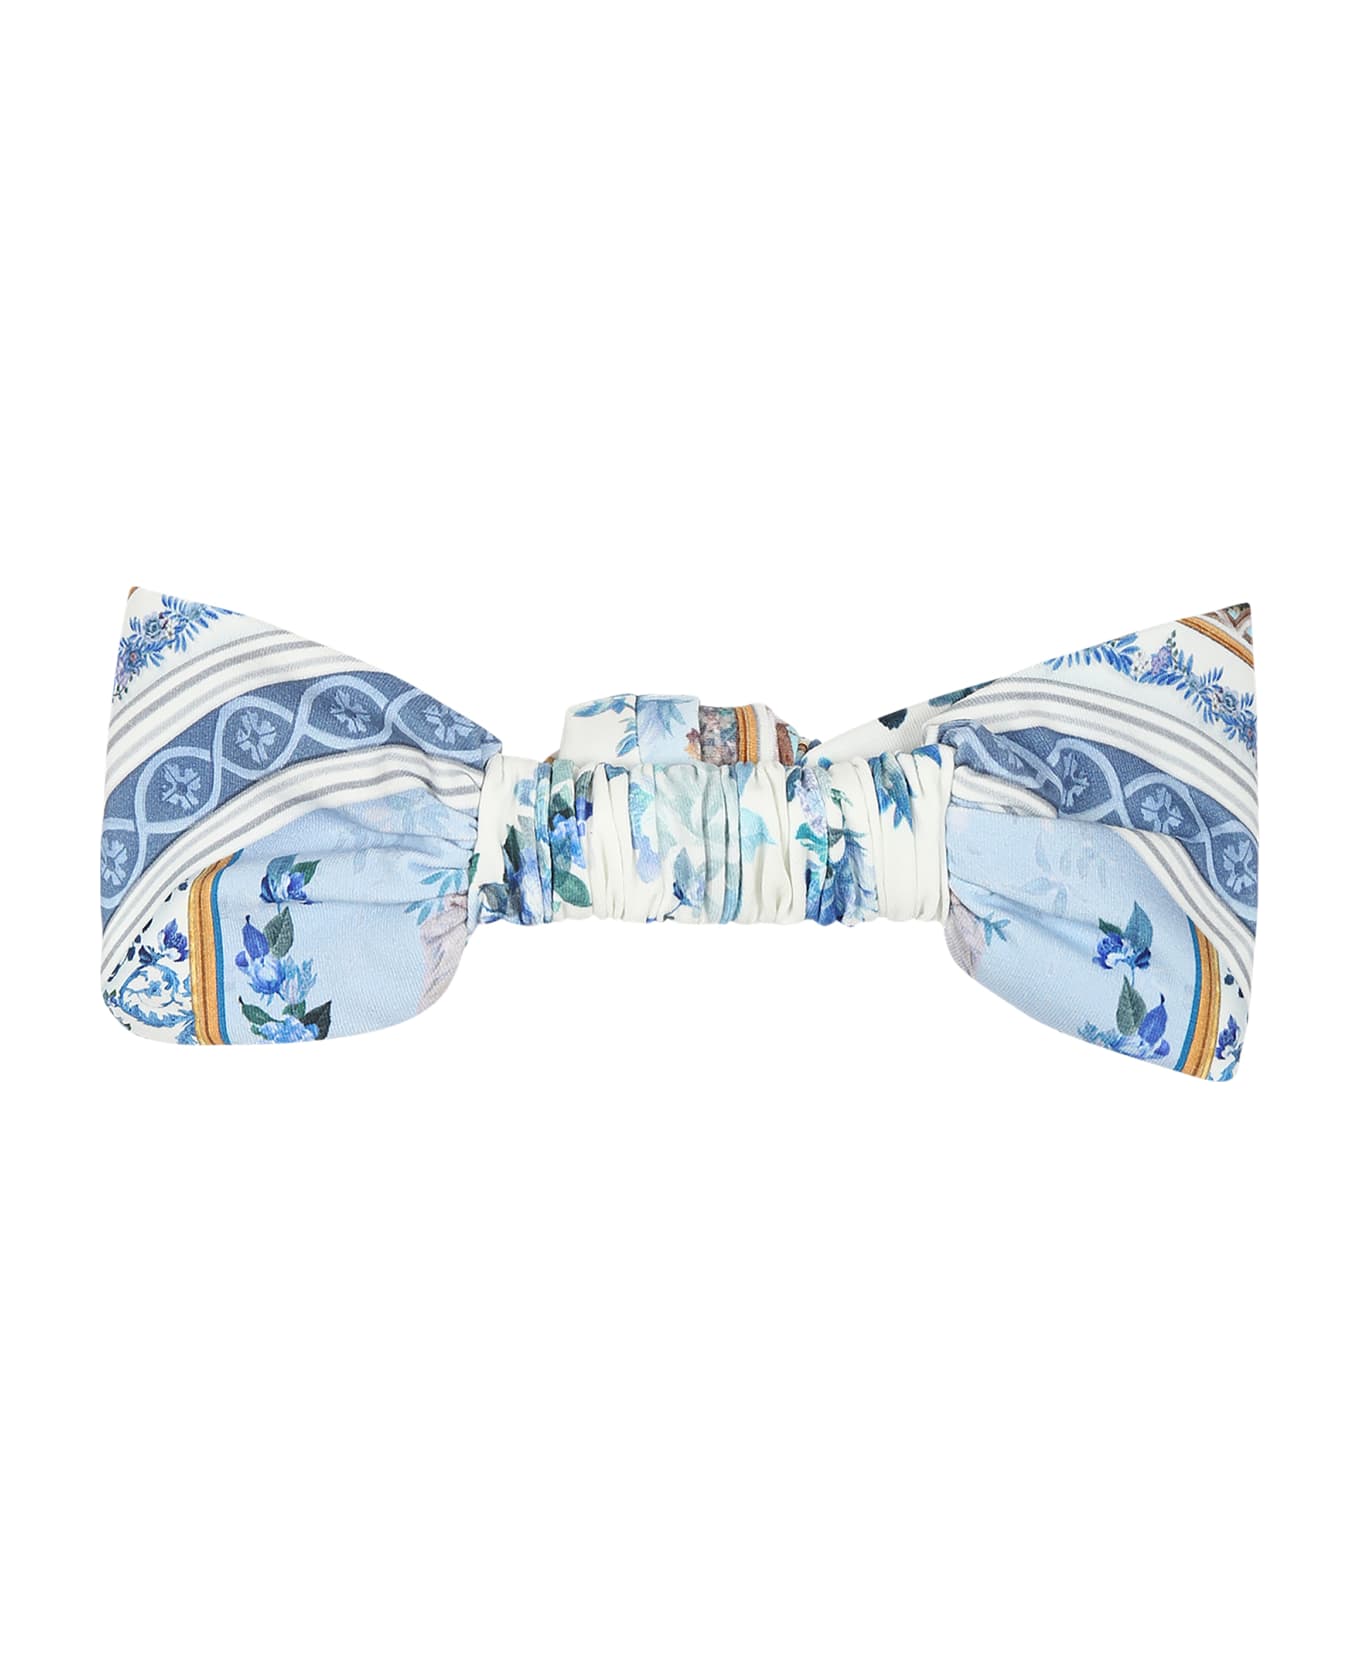 Camilla Light Blue Hairband For Girl With Floral Print - Light Blue